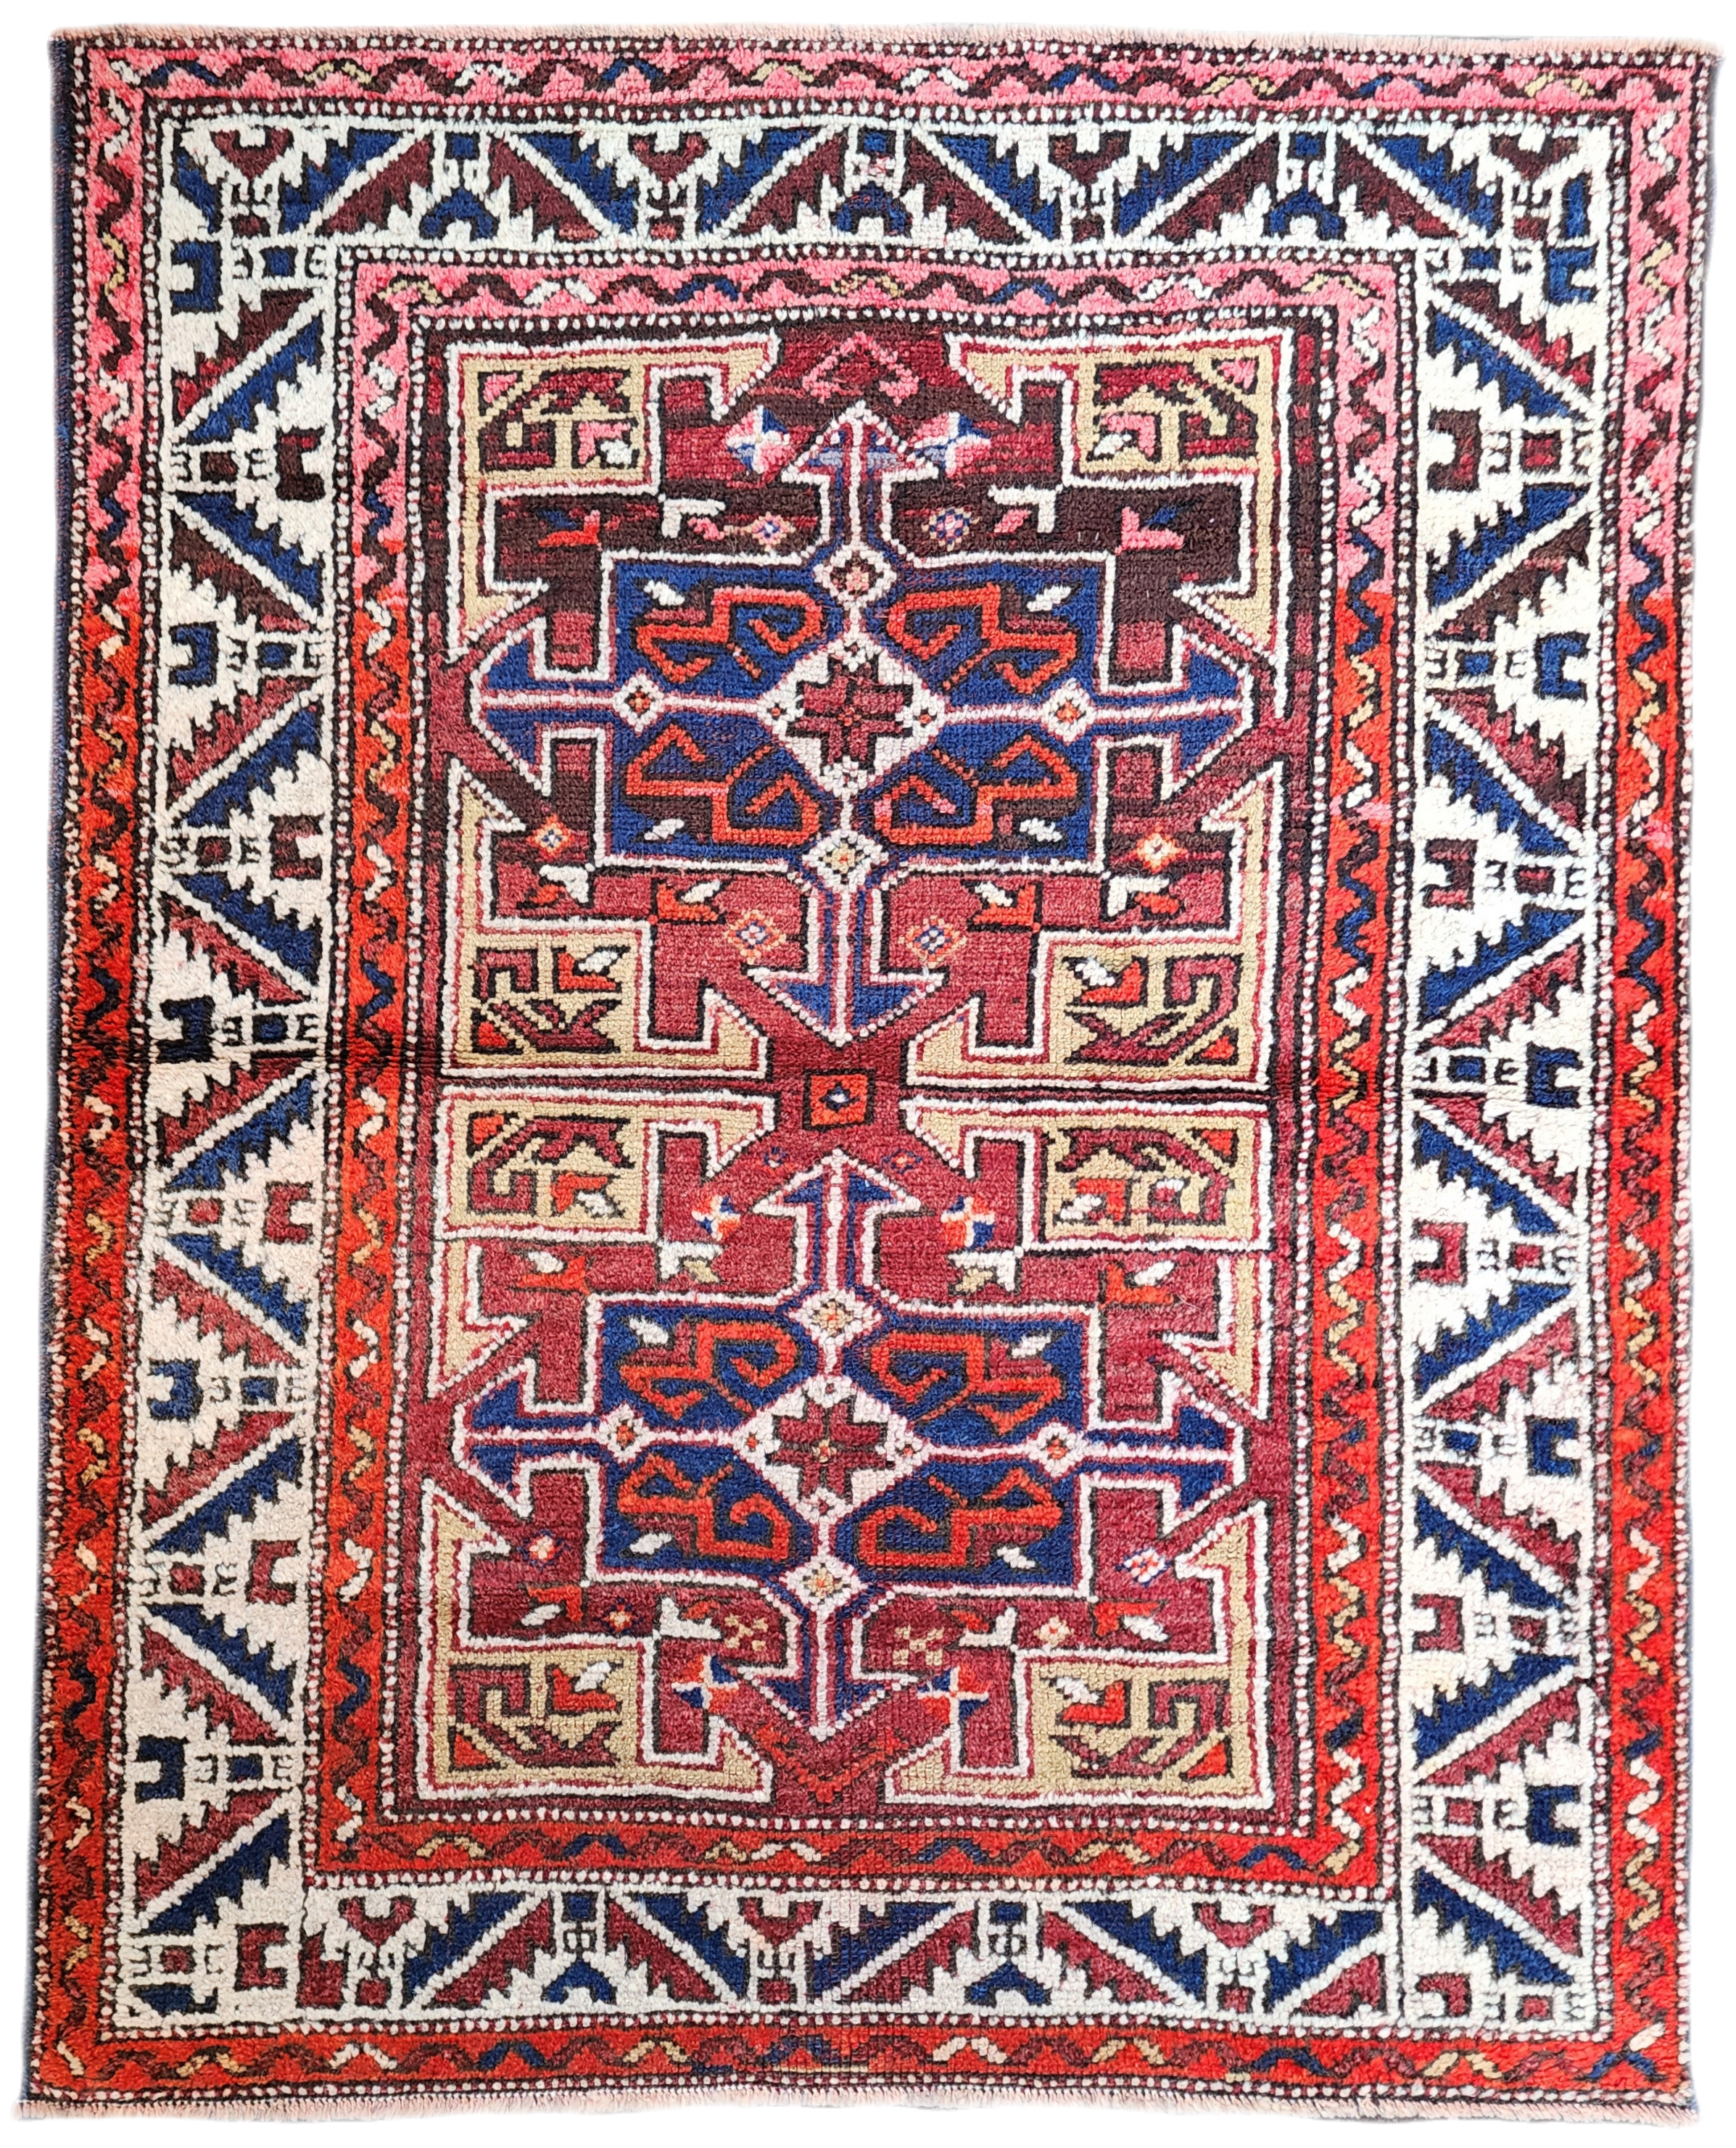 Antique Turkish Bergama Rug, Red, Blue and White Natural Rug